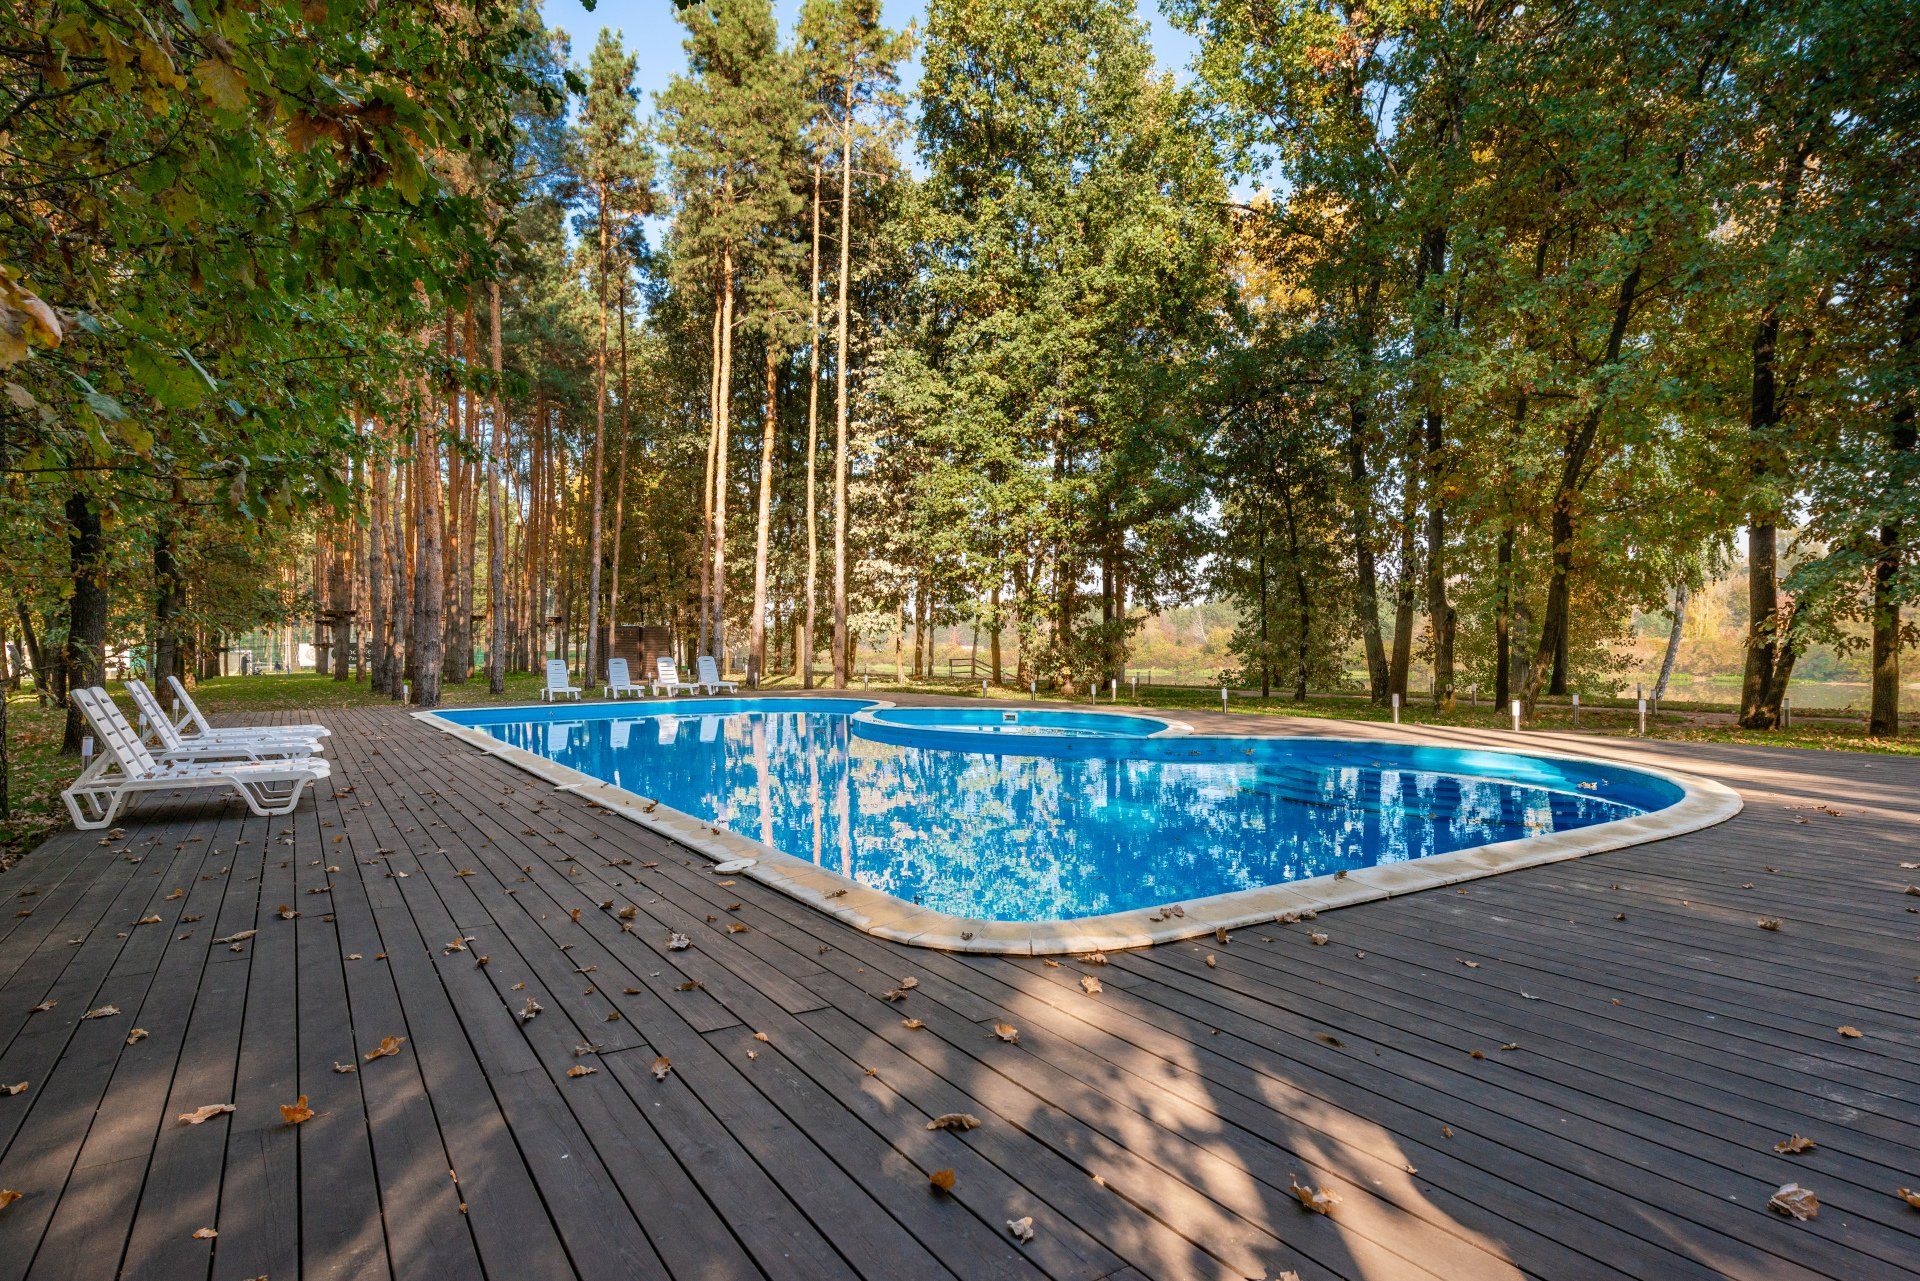 A stained deck surrounding a pool in the backyard.